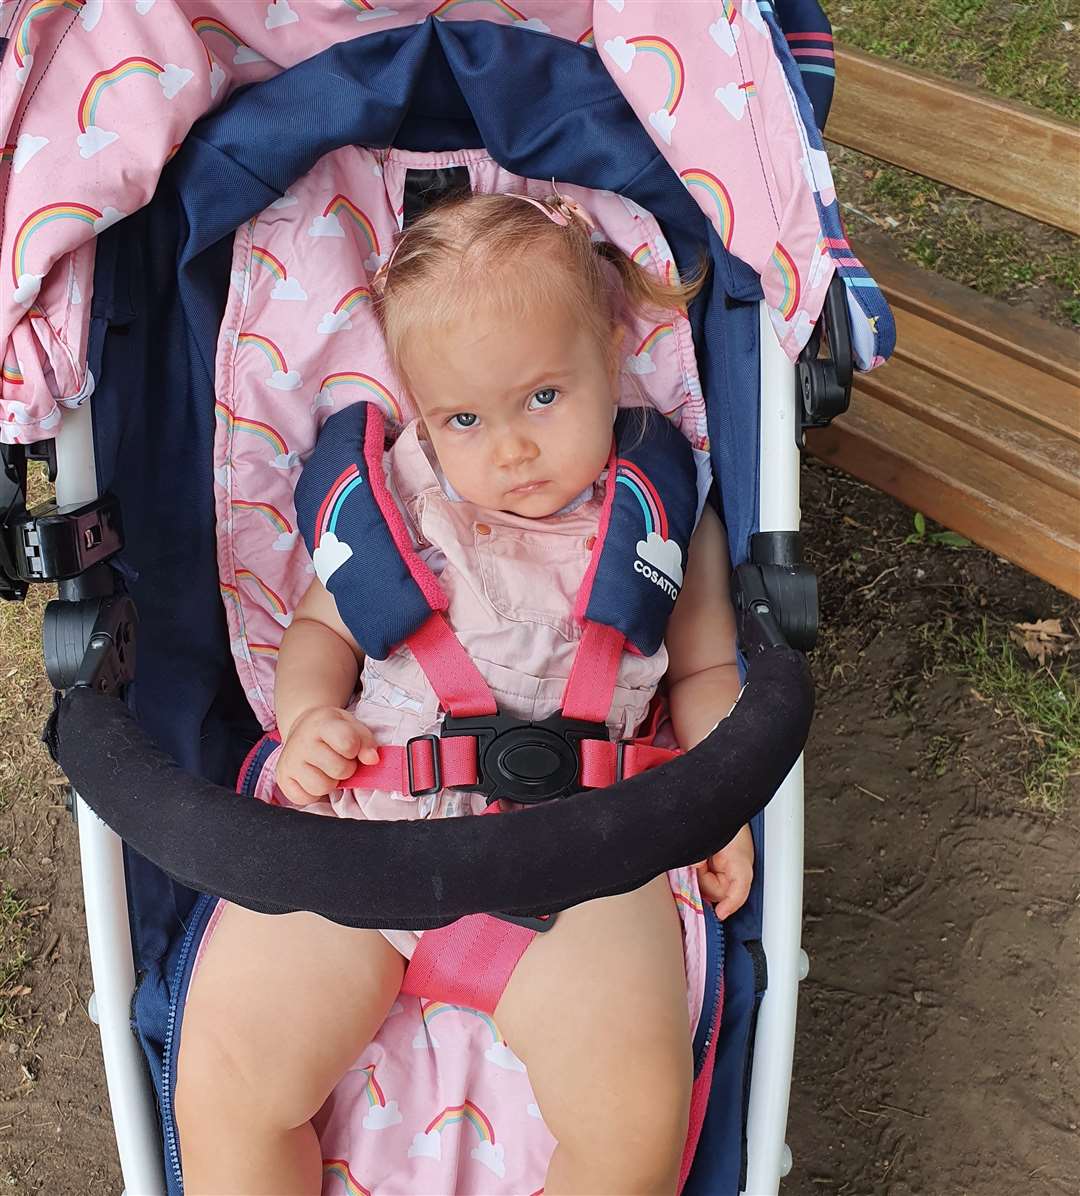 Regular pushchairs are uncomfortable for one-year-old Jennifer